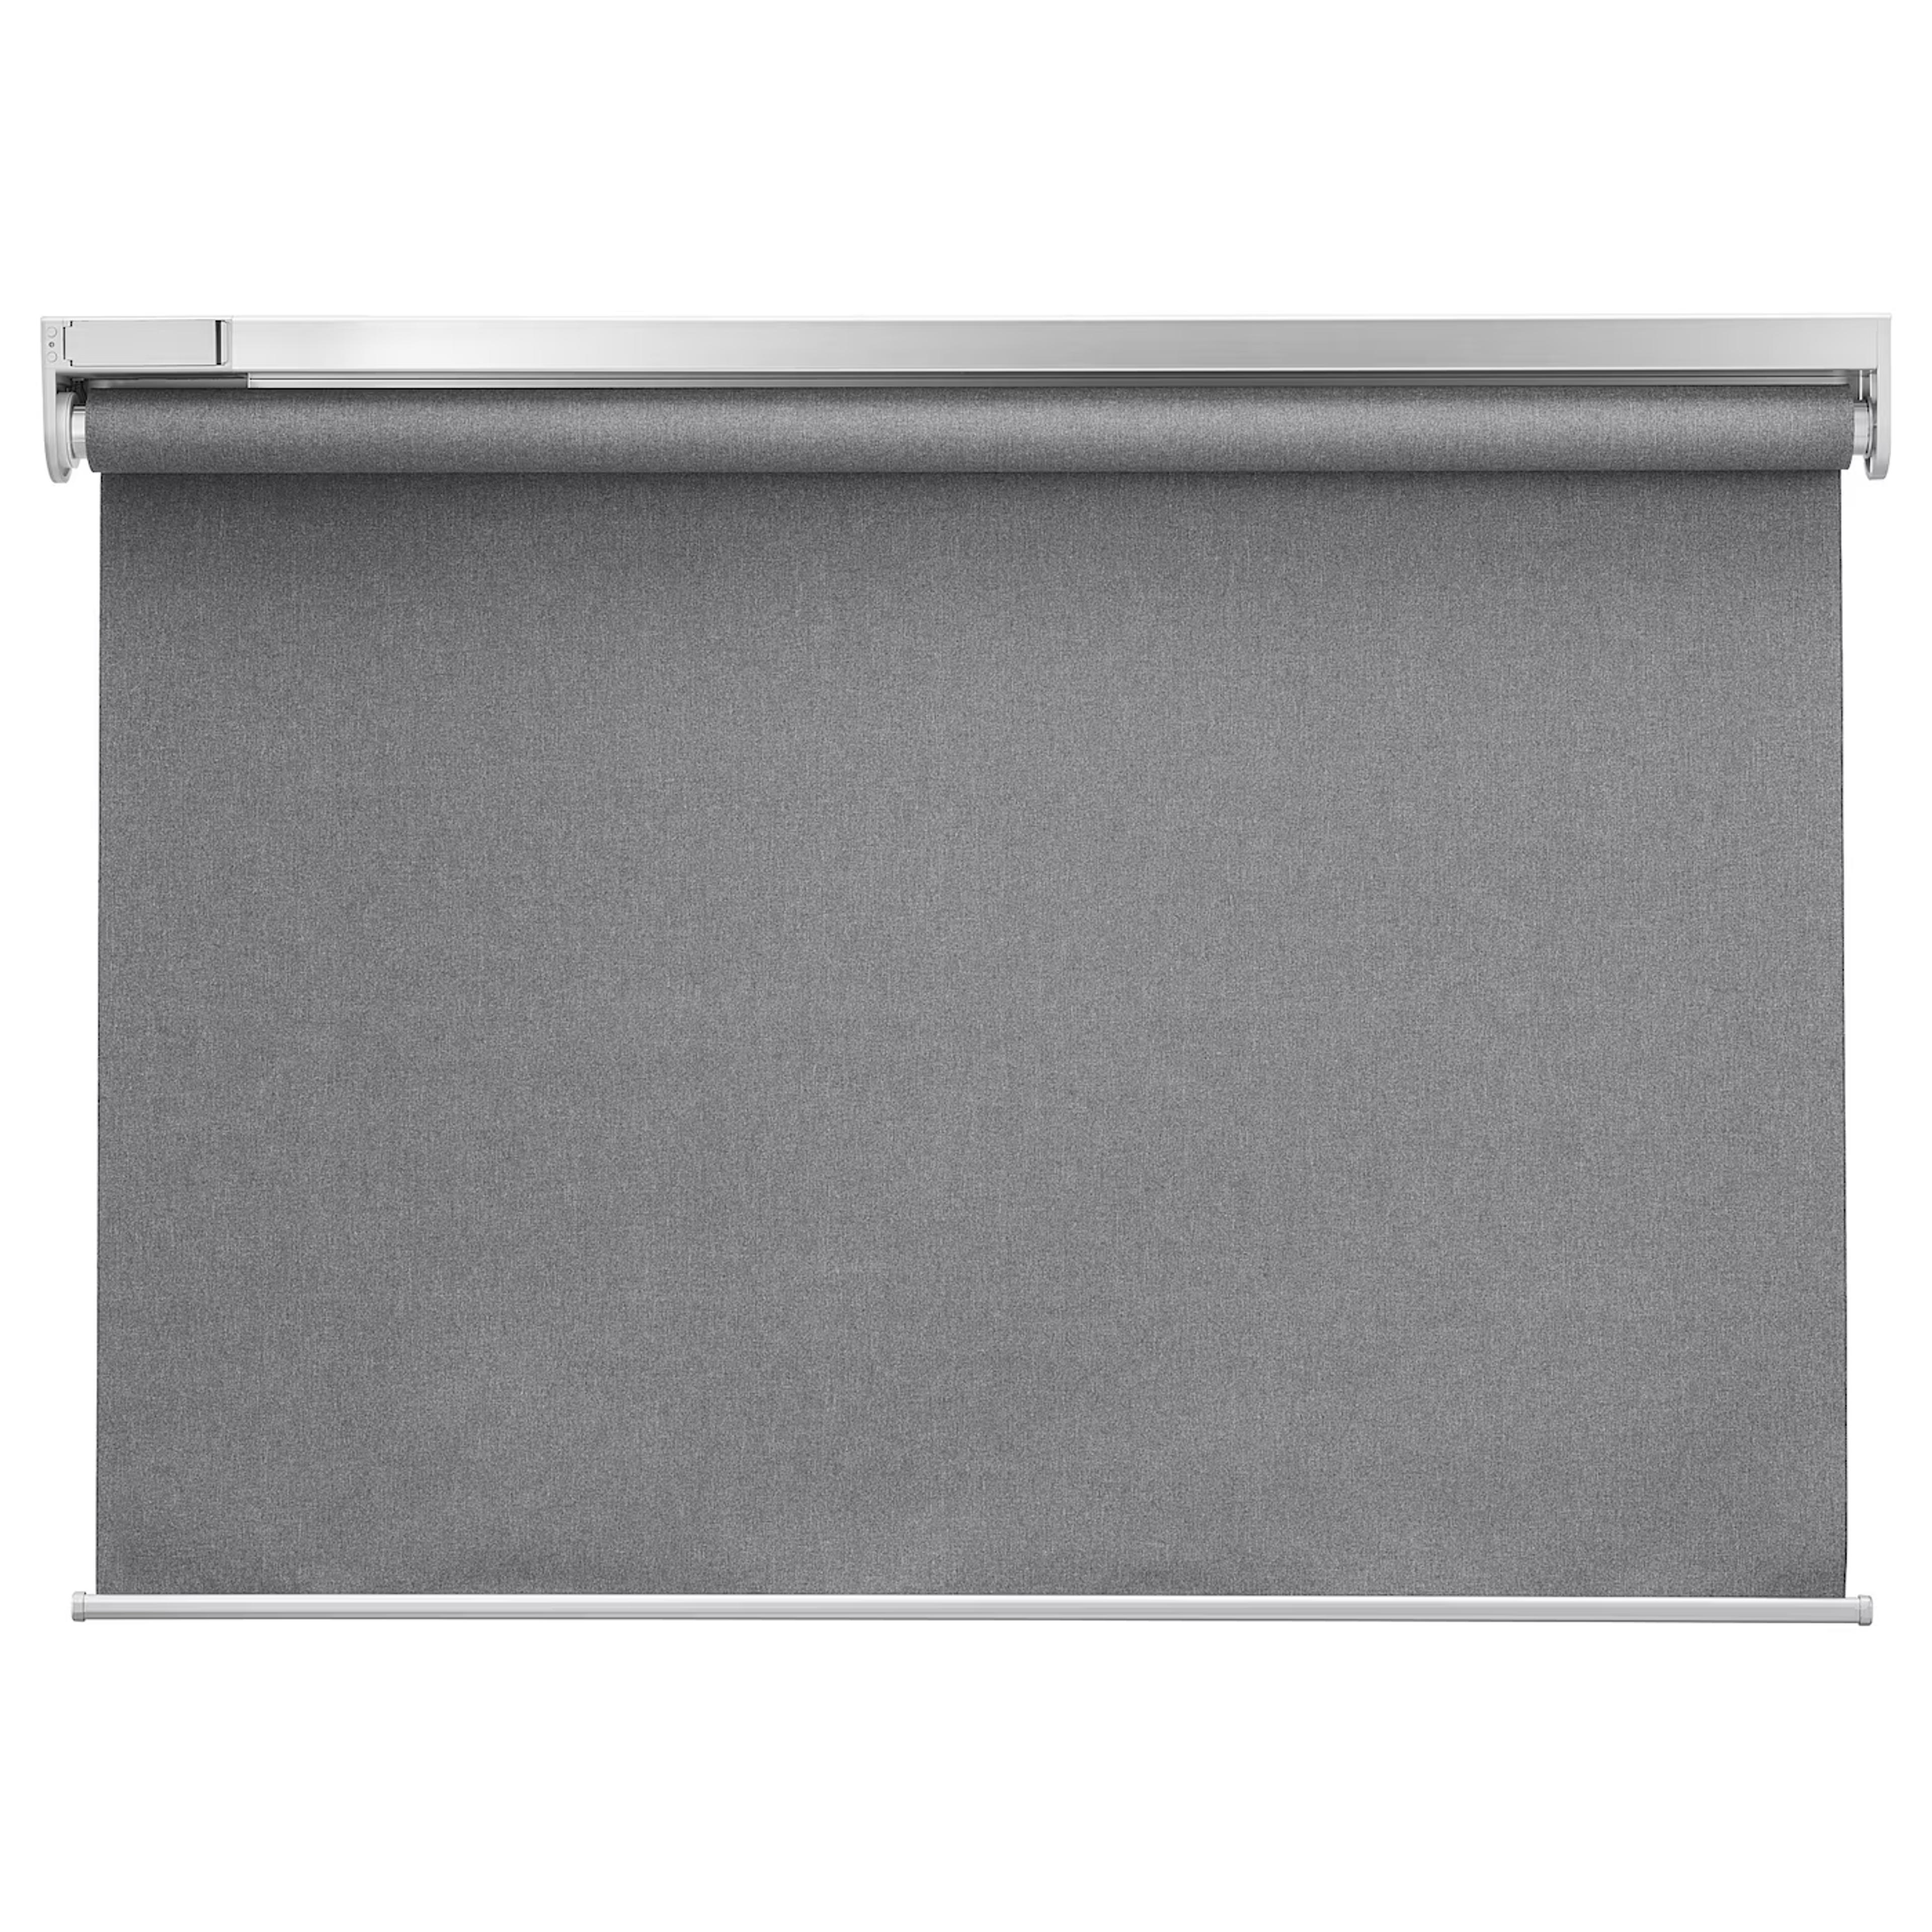 FYRTUR Black-out roller blind, smart wireless/battery operated gray, 30x76 ¾" - IKEA